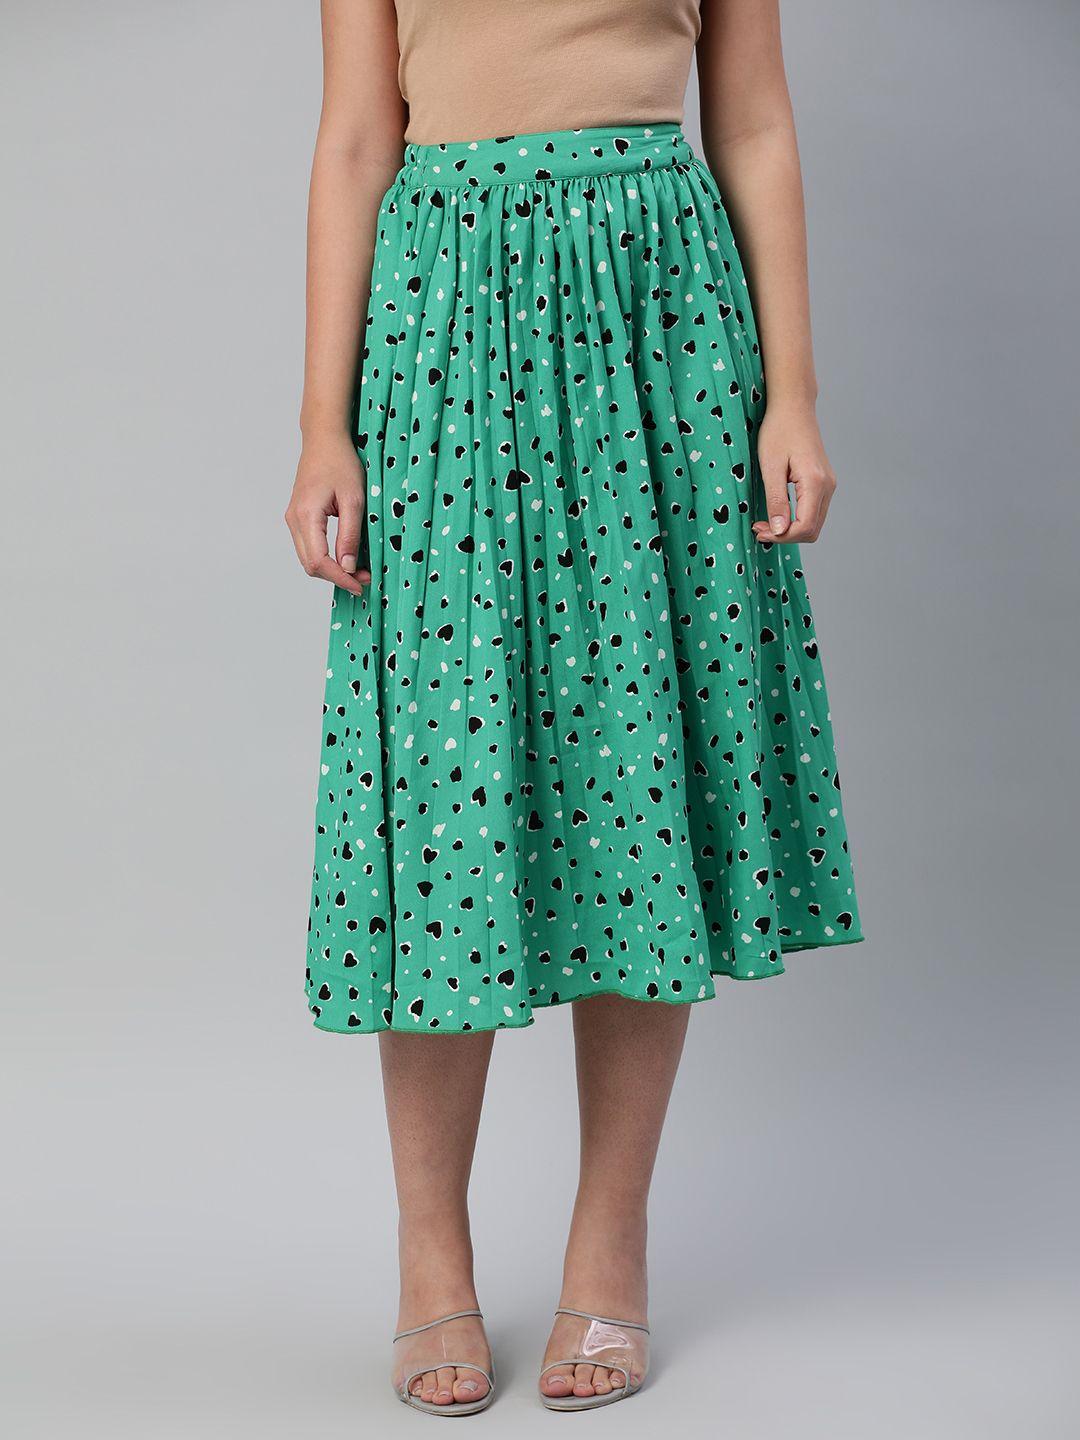 anvi-be-yourself-women-abstract-printed-pleated-flared-midi-skirt